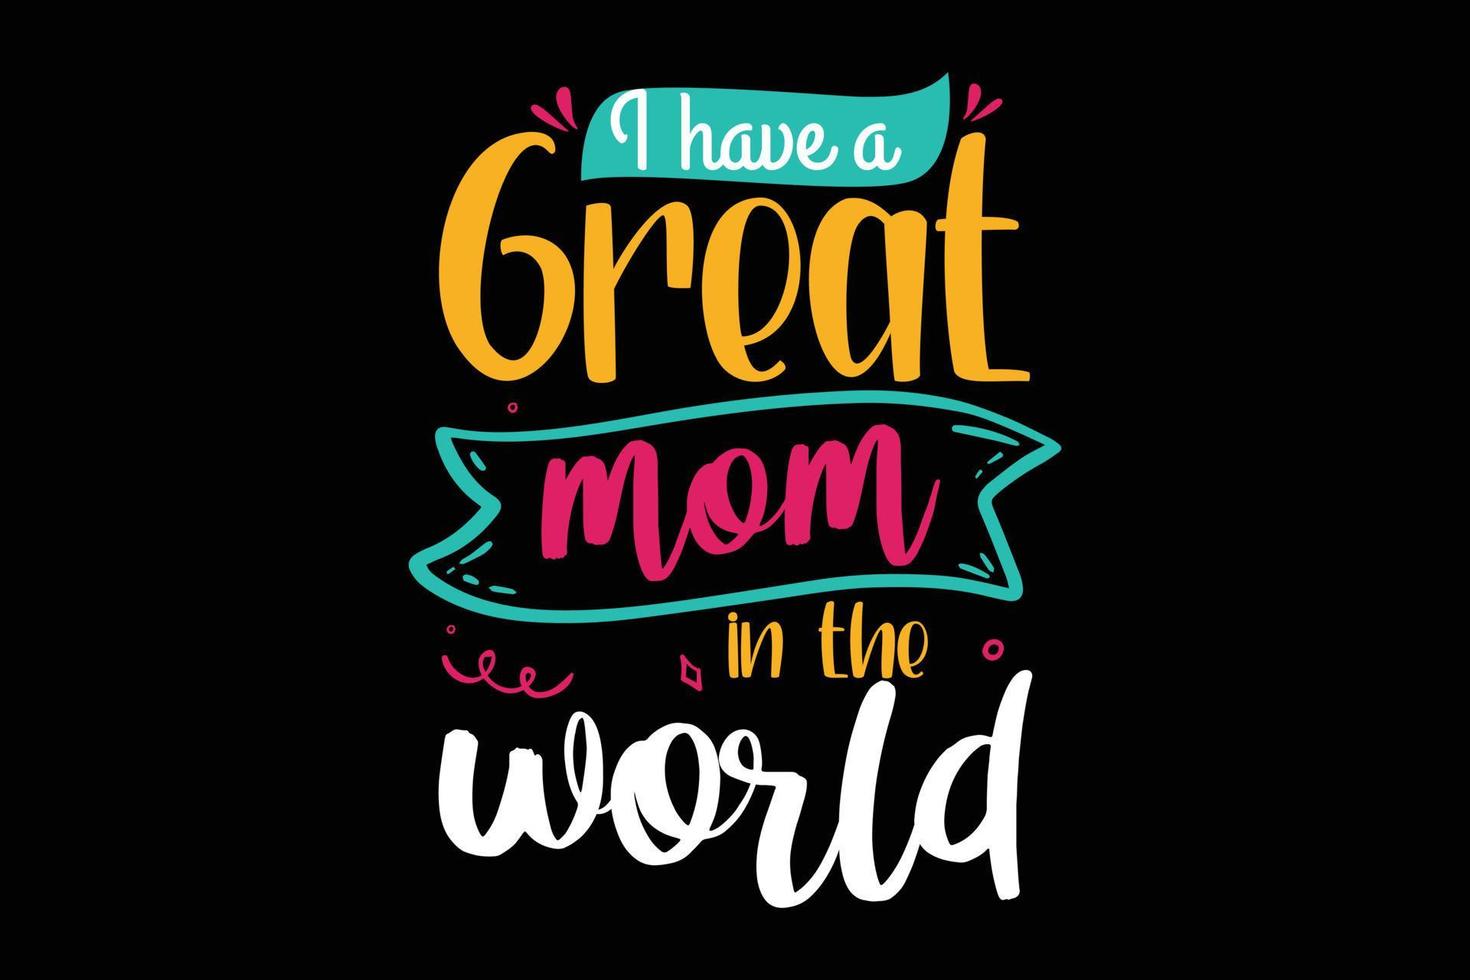 I have a great mom in the world typography t shirt design. vector